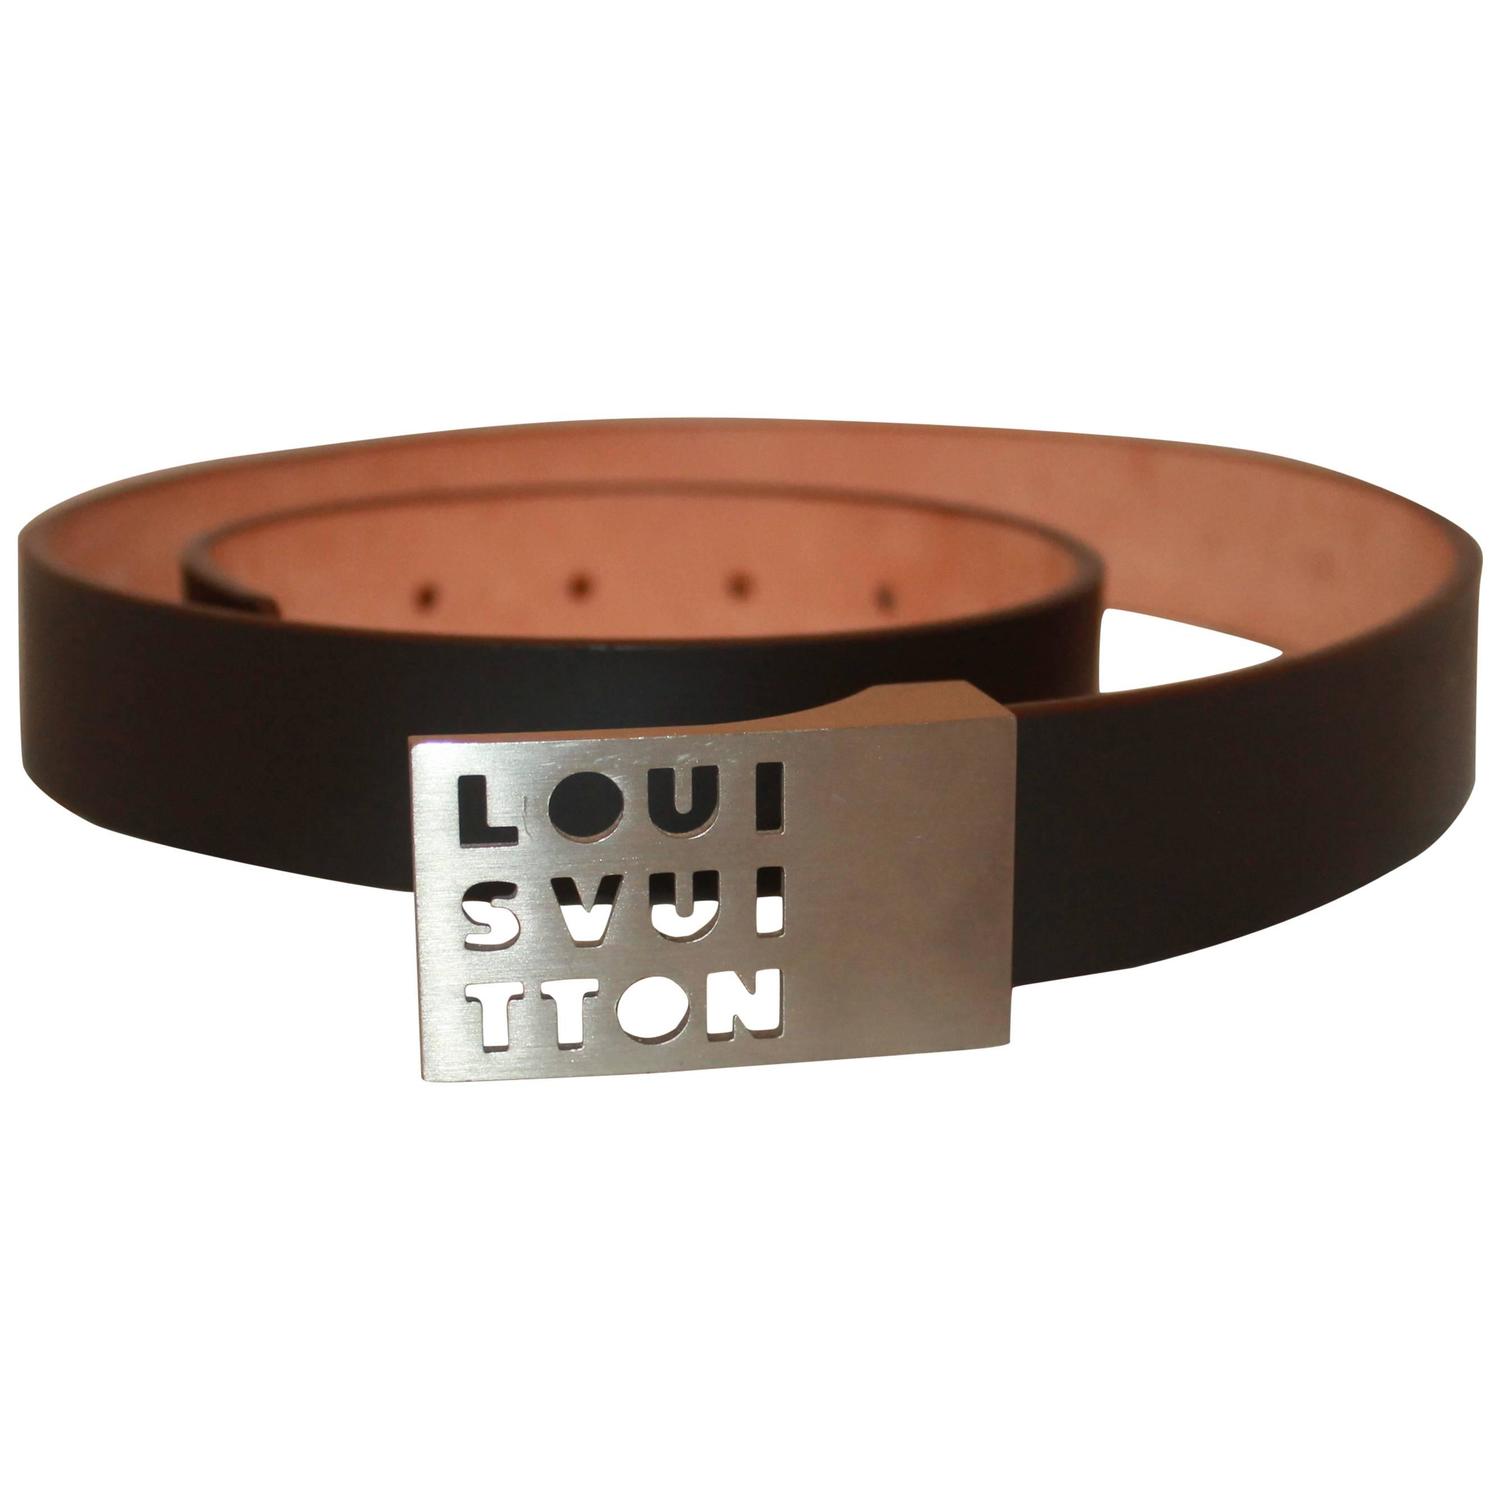 White Louis Vuitton Belt Silver Buckle | Confederated Tribes of the Umatilla Indian Reservation